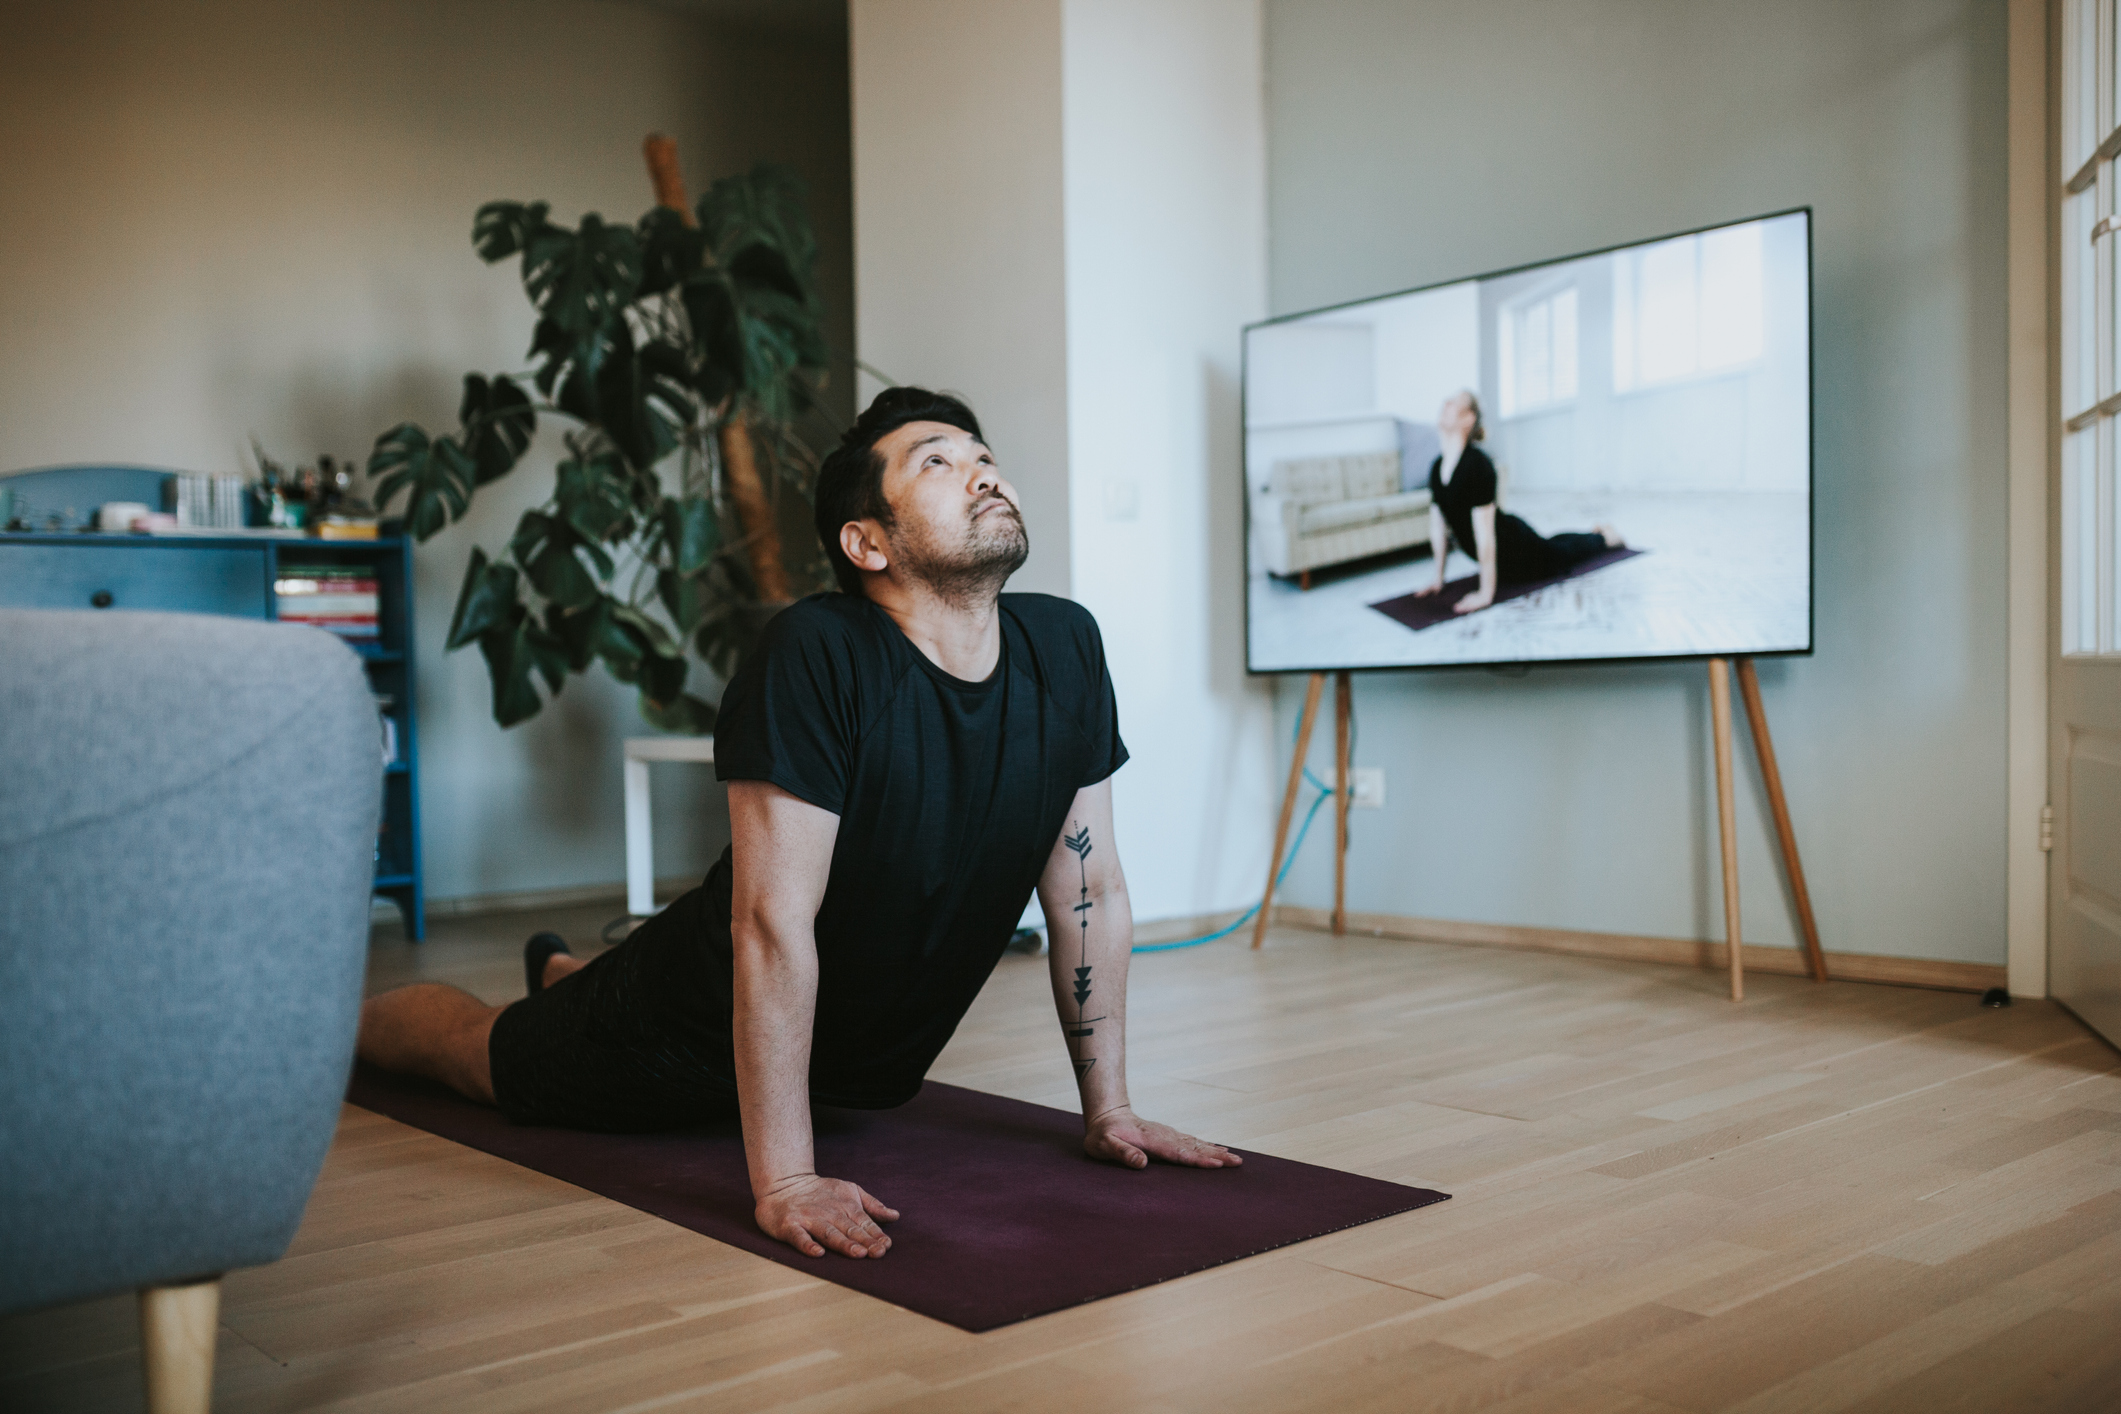 Man taking online yoga lessons during lockdown in isolation